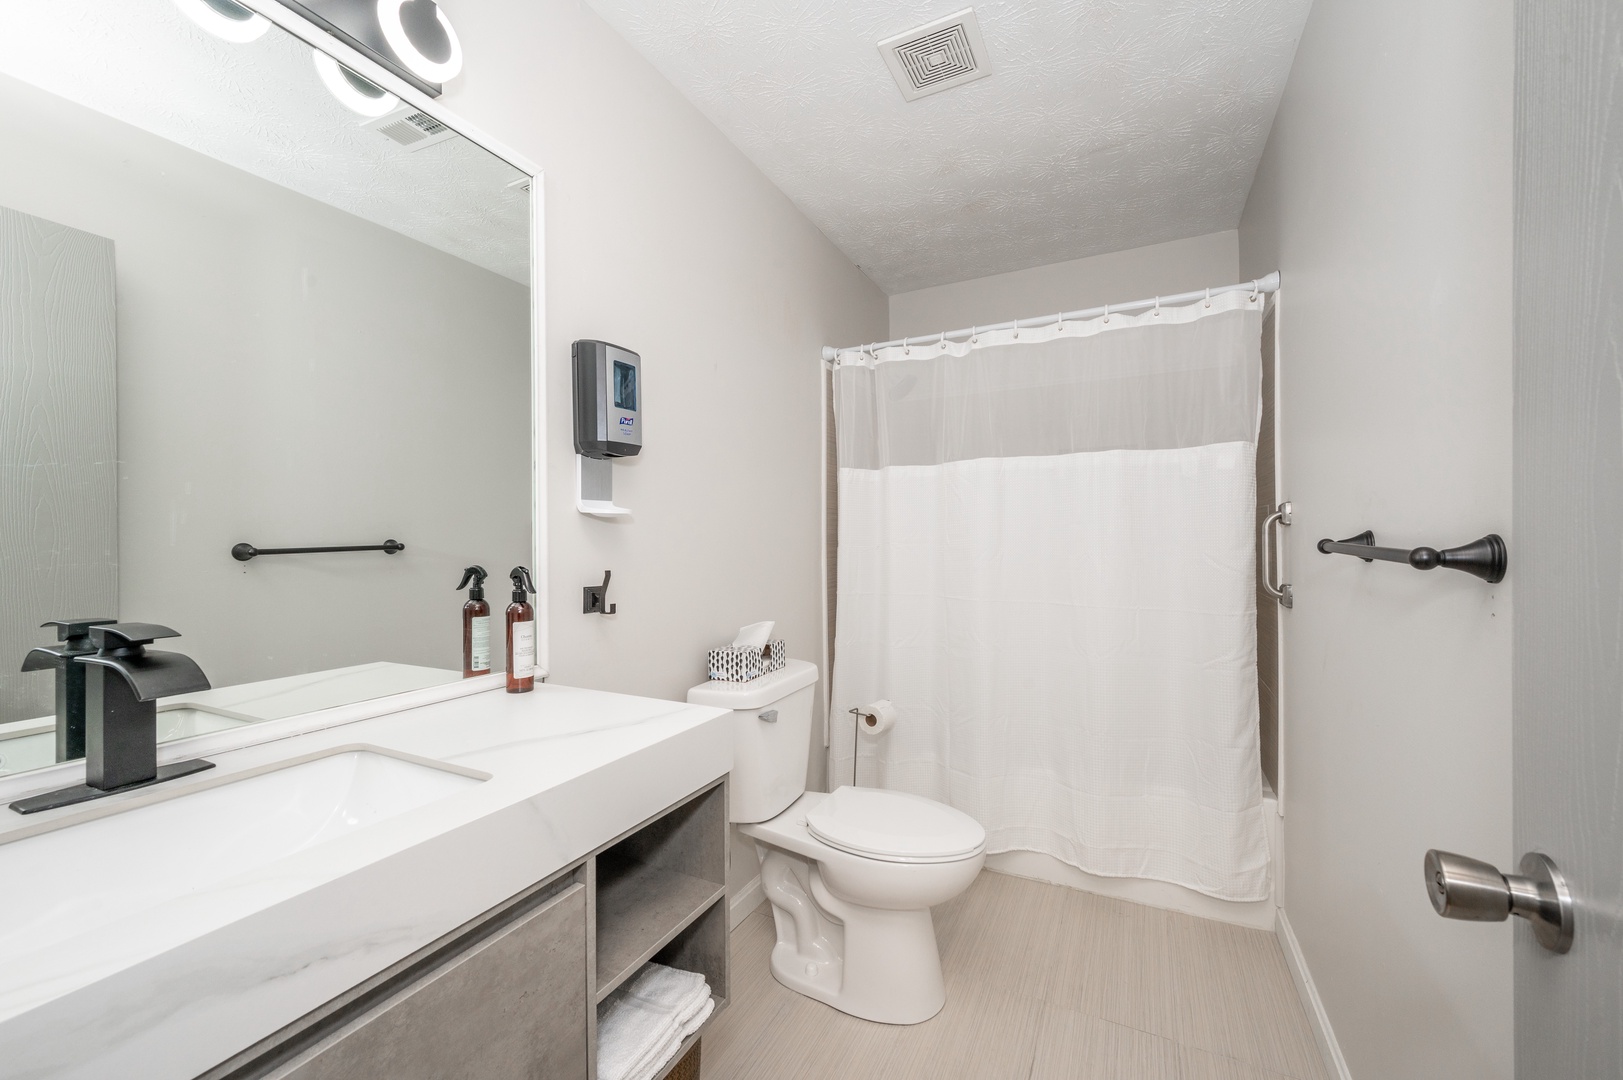 The full bathroom in Apartment 1 features a single vanity & shower/tub combo